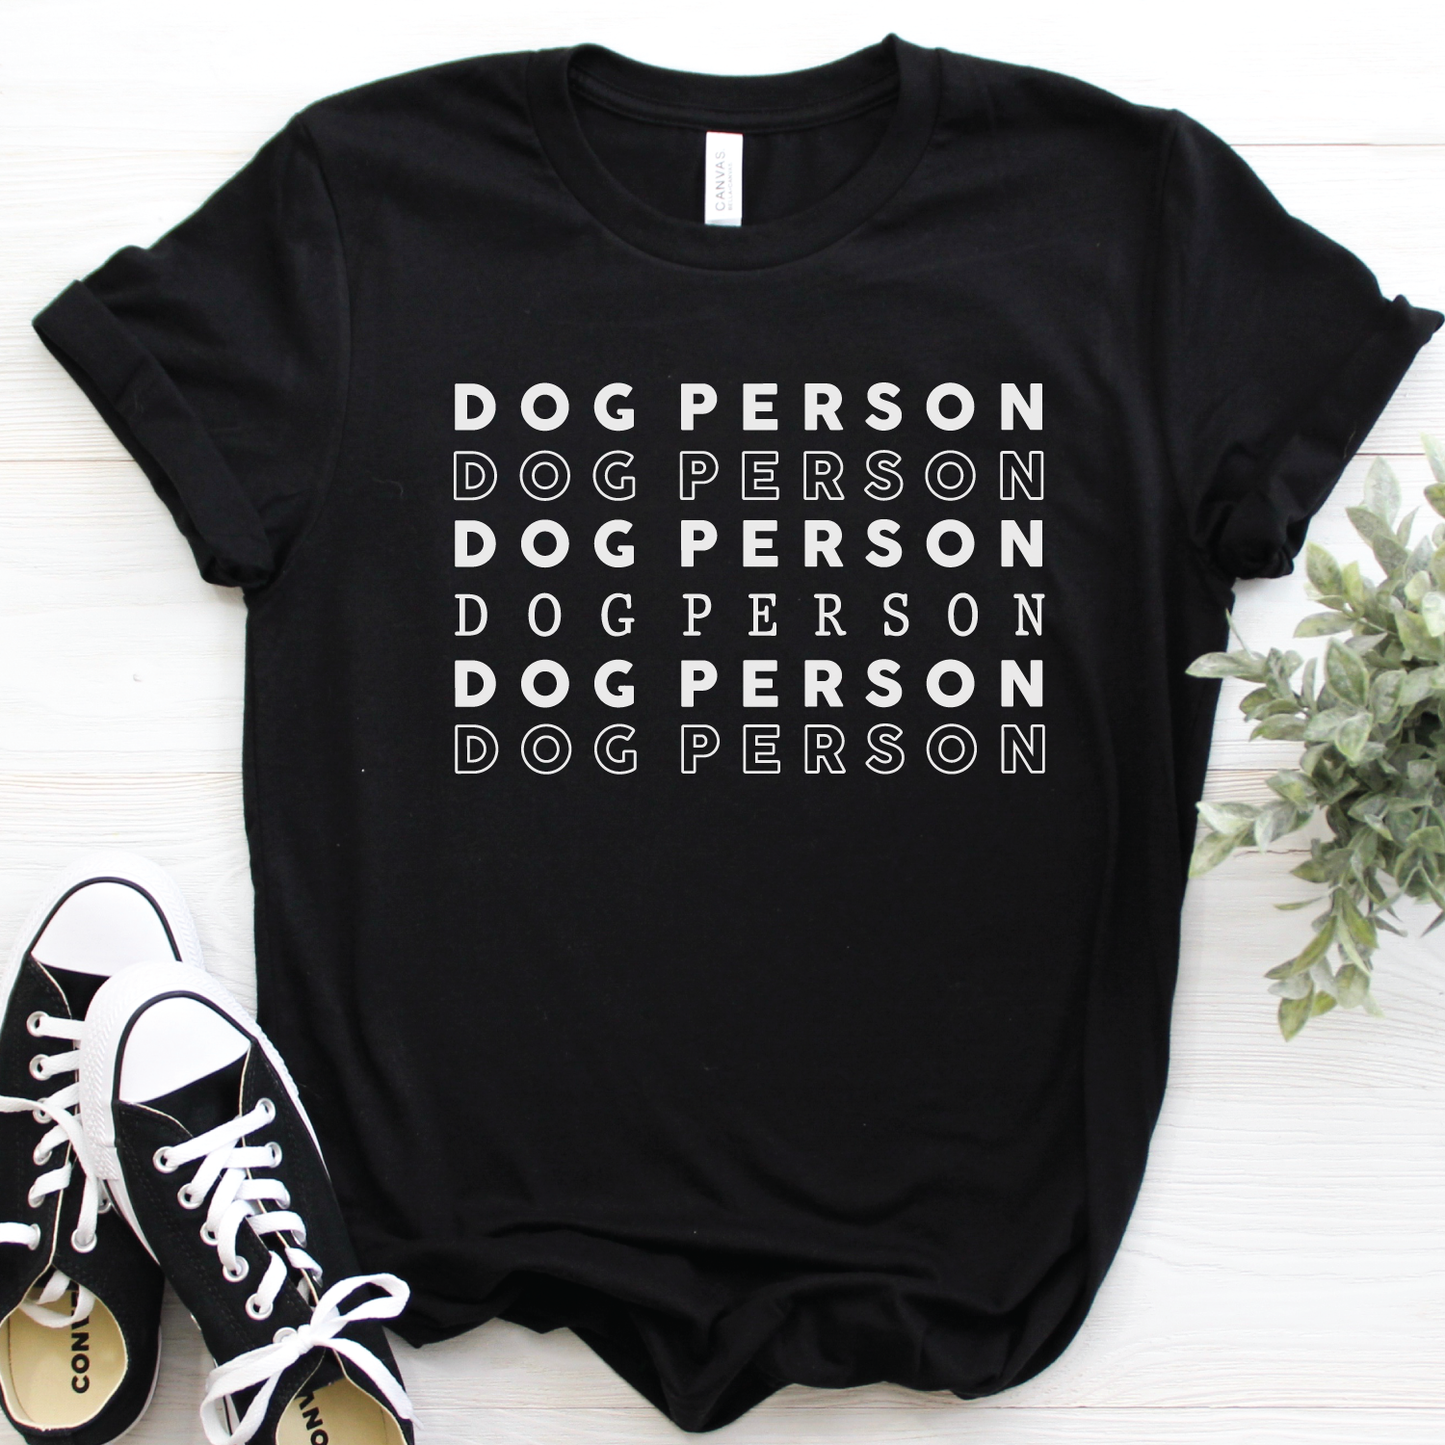 Dog person graphic tee